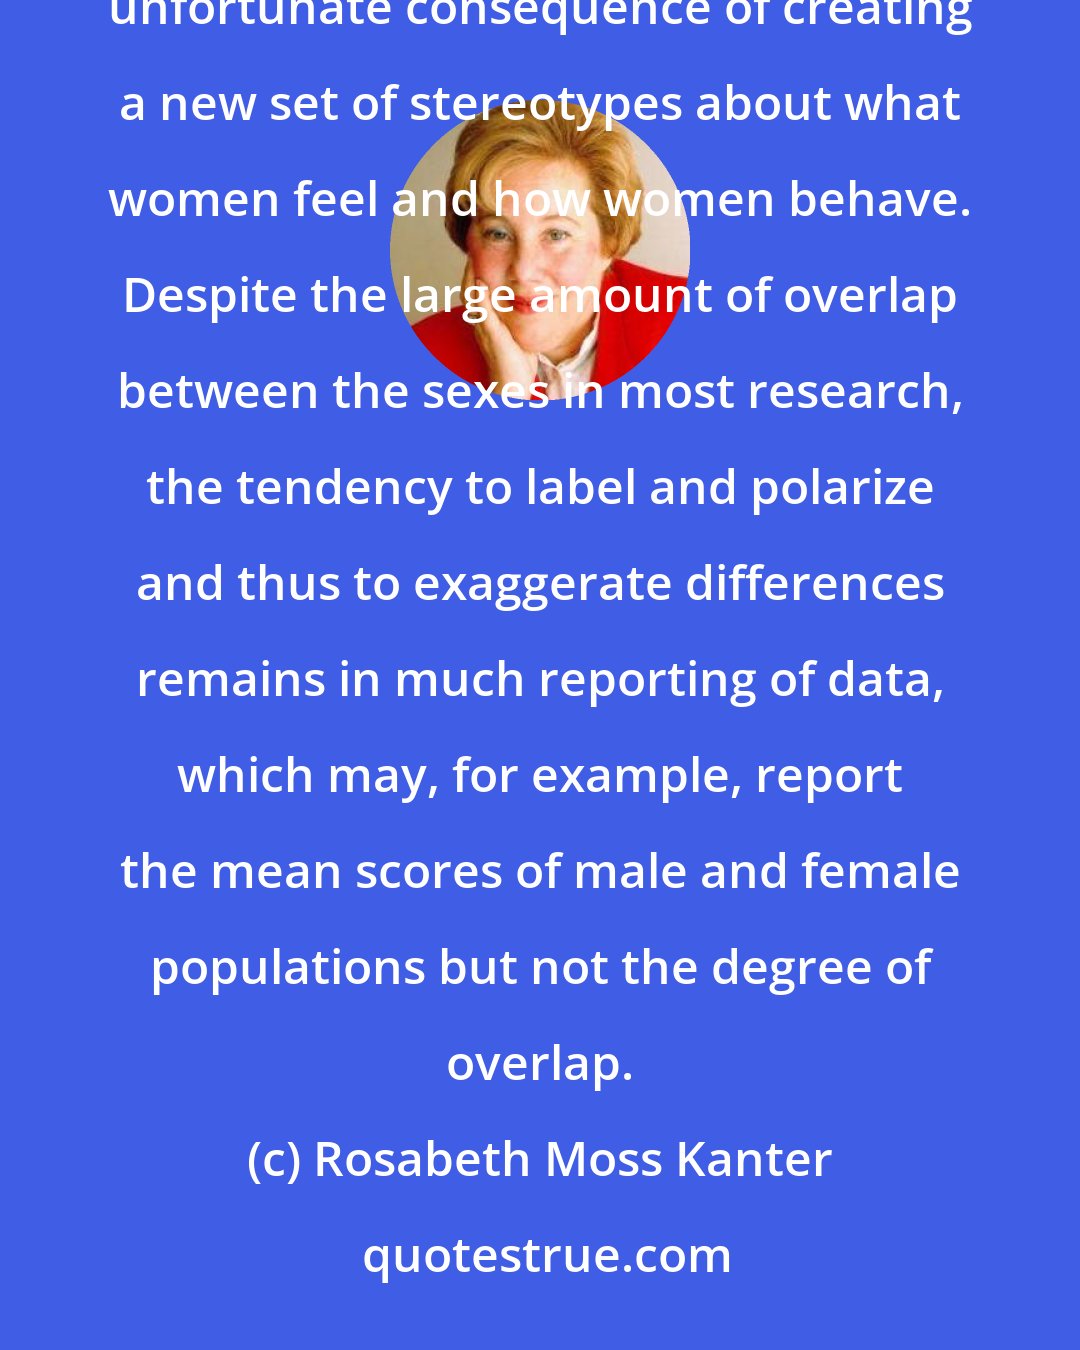 Rosabeth Moss Kanter: Even the new feminist research on sex-role socialization and sex differences has sometimes had the unfortunate consequence of creating a new set of stereotypes about what women feel and how women behave. Despite the large amount of overlap between the sexes in most research, the tendency to label and polarize and thus to exaggerate differences remains in much reporting of data, which may, for example, report the mean scores of male and female populations but not the degree of overlap.